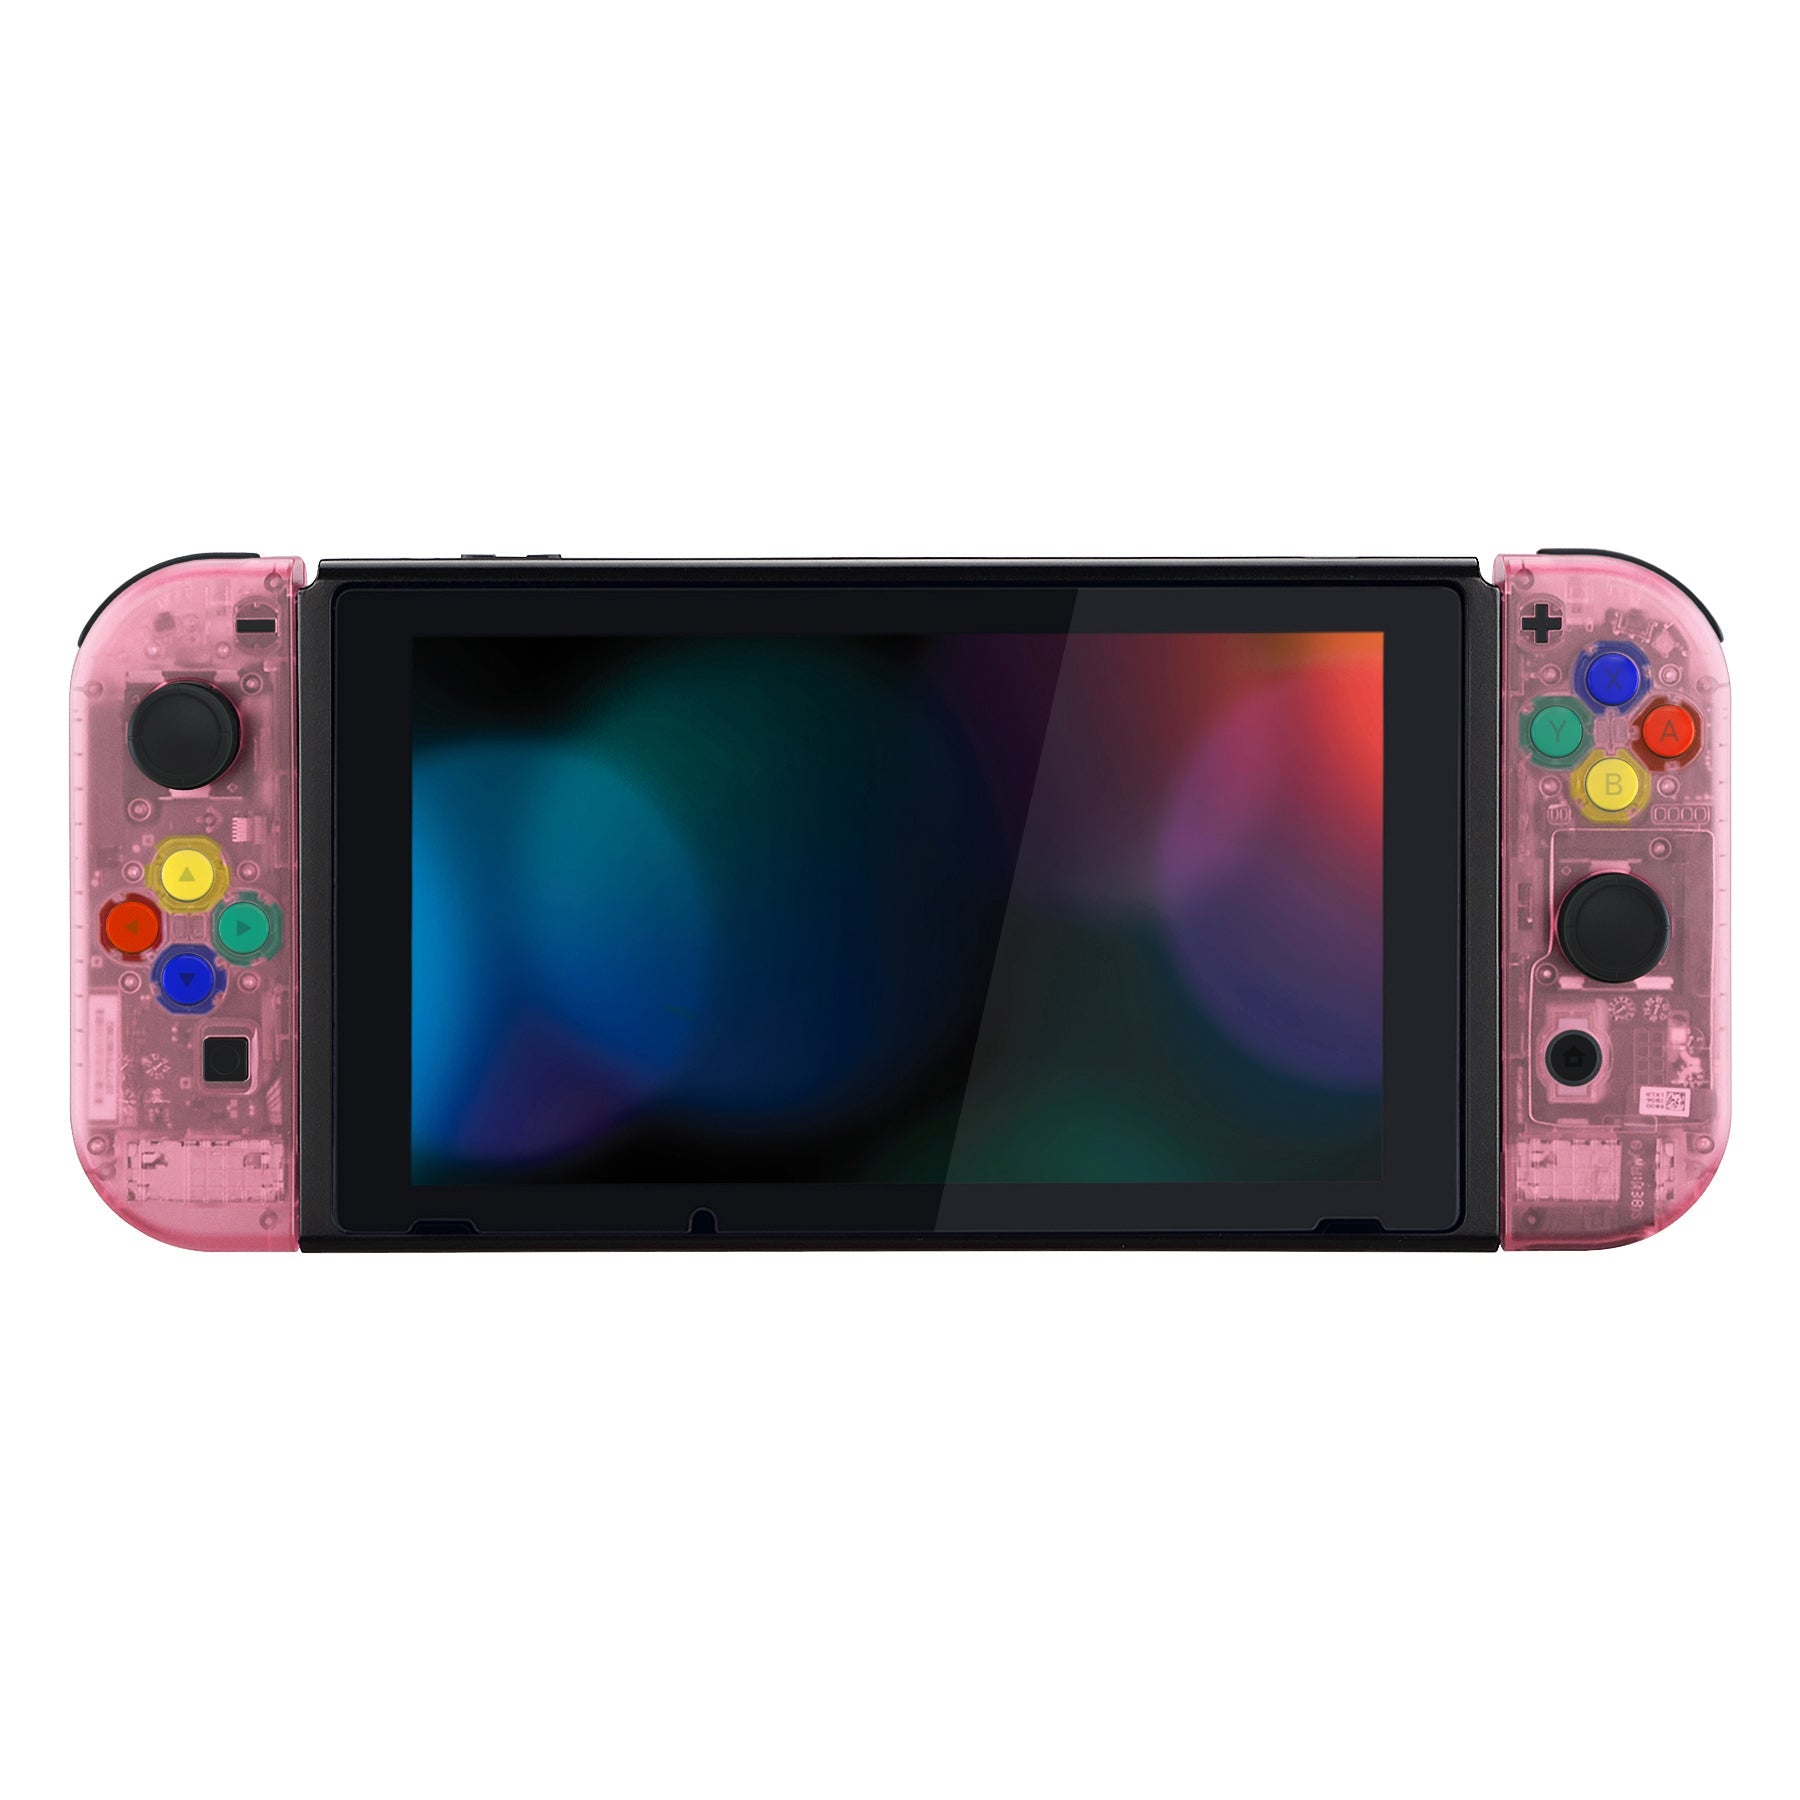 eXtremeRate Retail Back Plate for Nintendo Switch Console, NS Joycon Handheld Controller Housing with Colorful Buttons, DIY Replacement Shell for Nintendo Switch -Cherry Pink - QM507